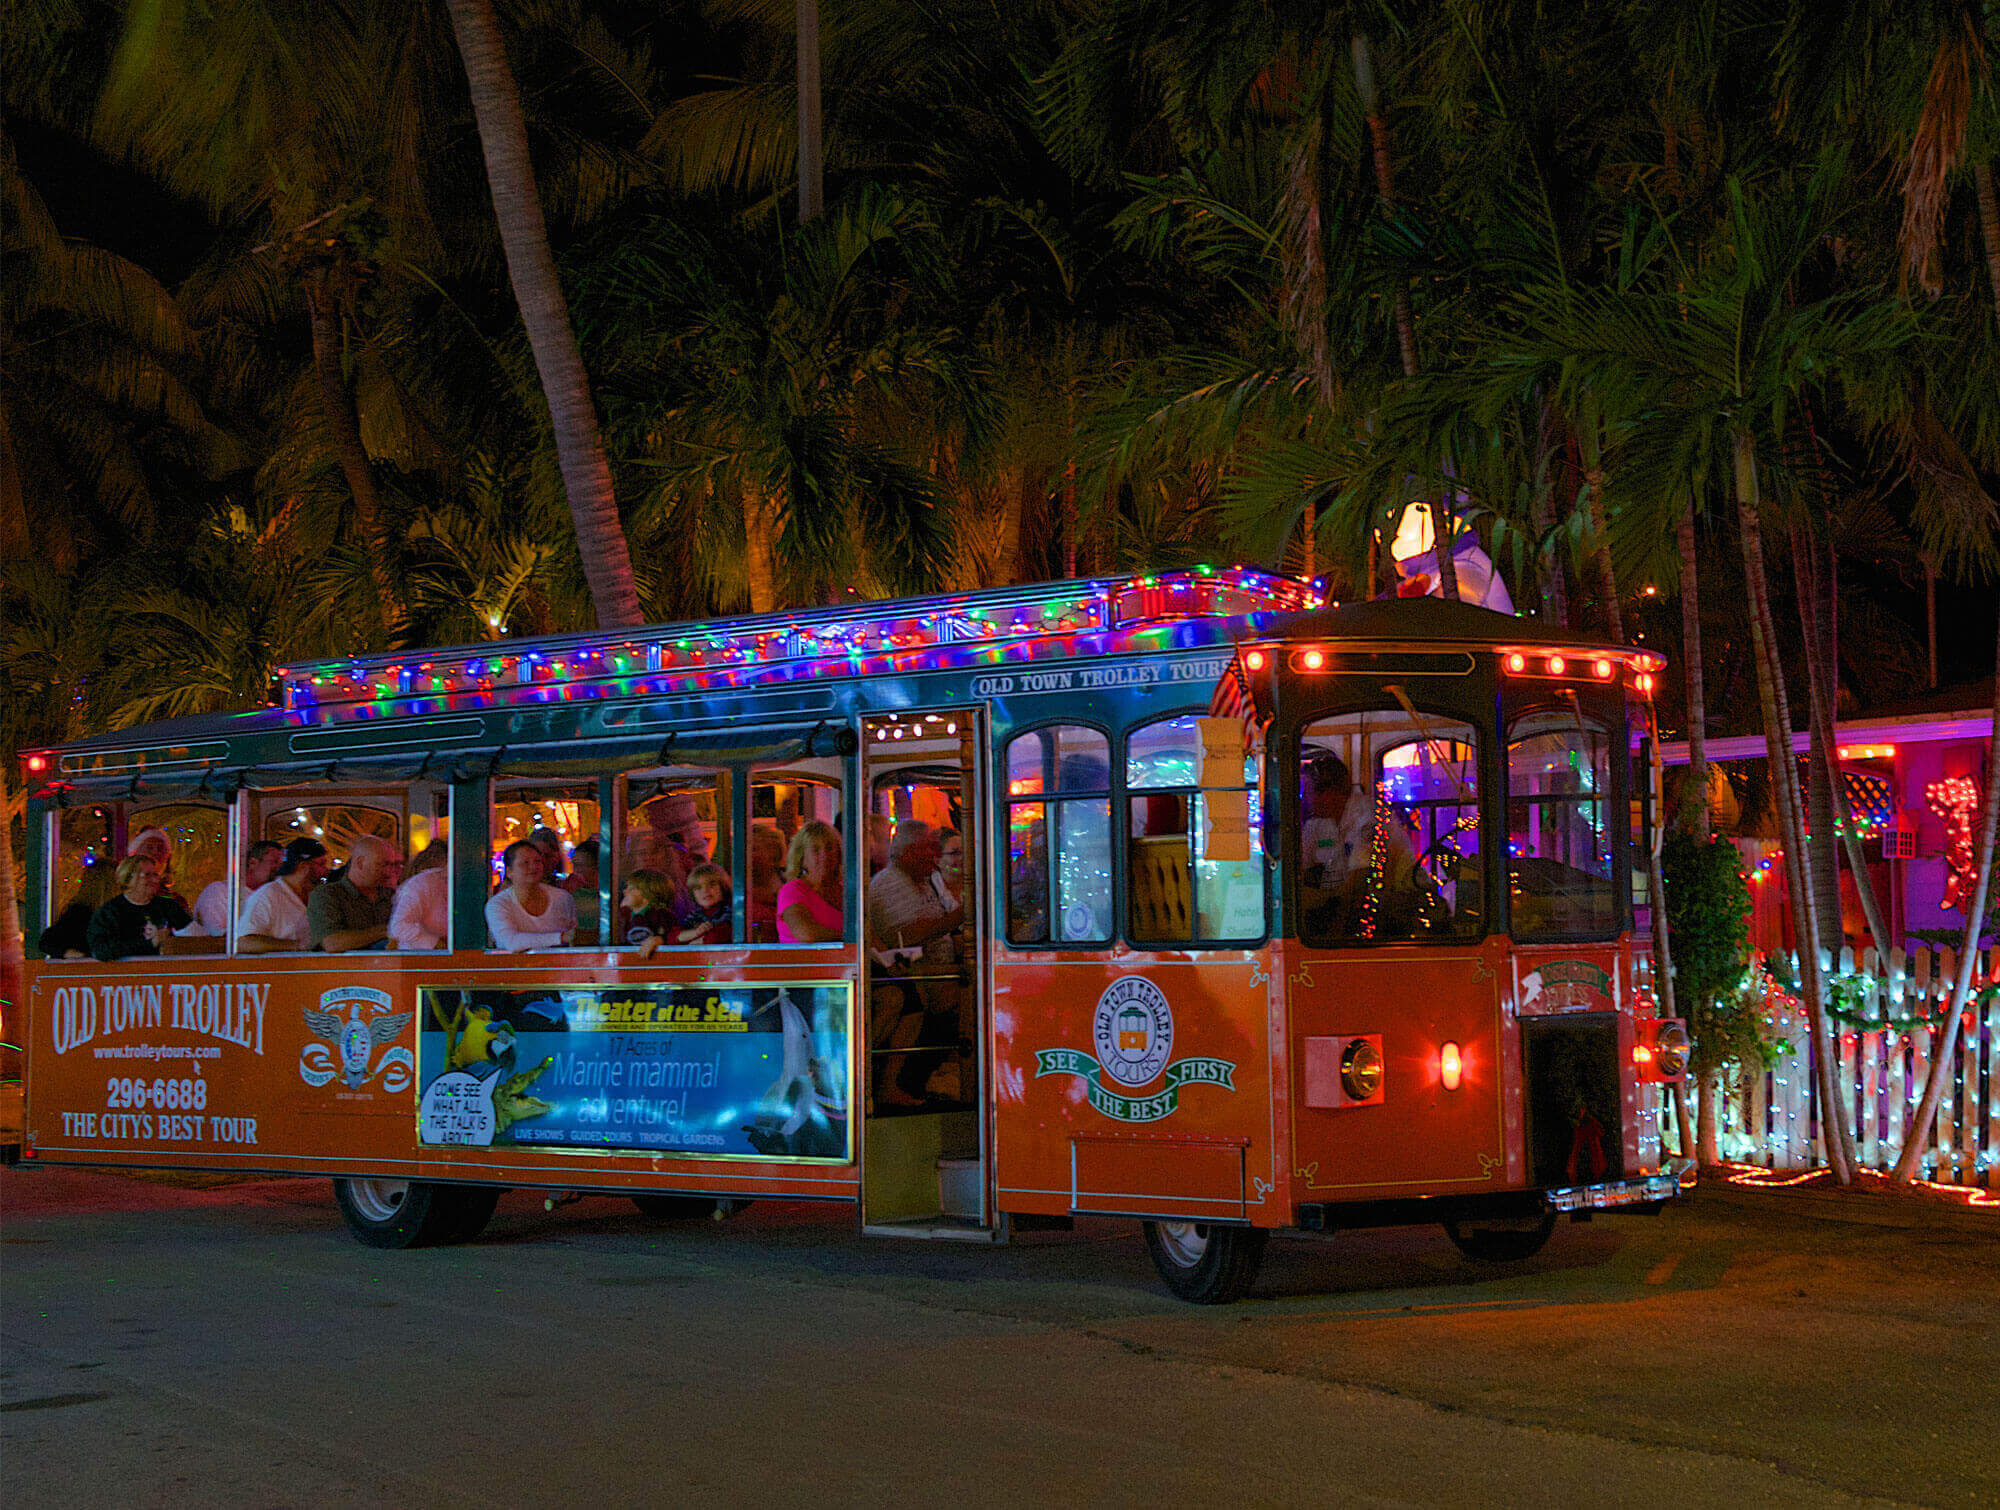 An Old Town Trolley decorated in lights on a Lights & Sights Holiday Tour in Key West, FL